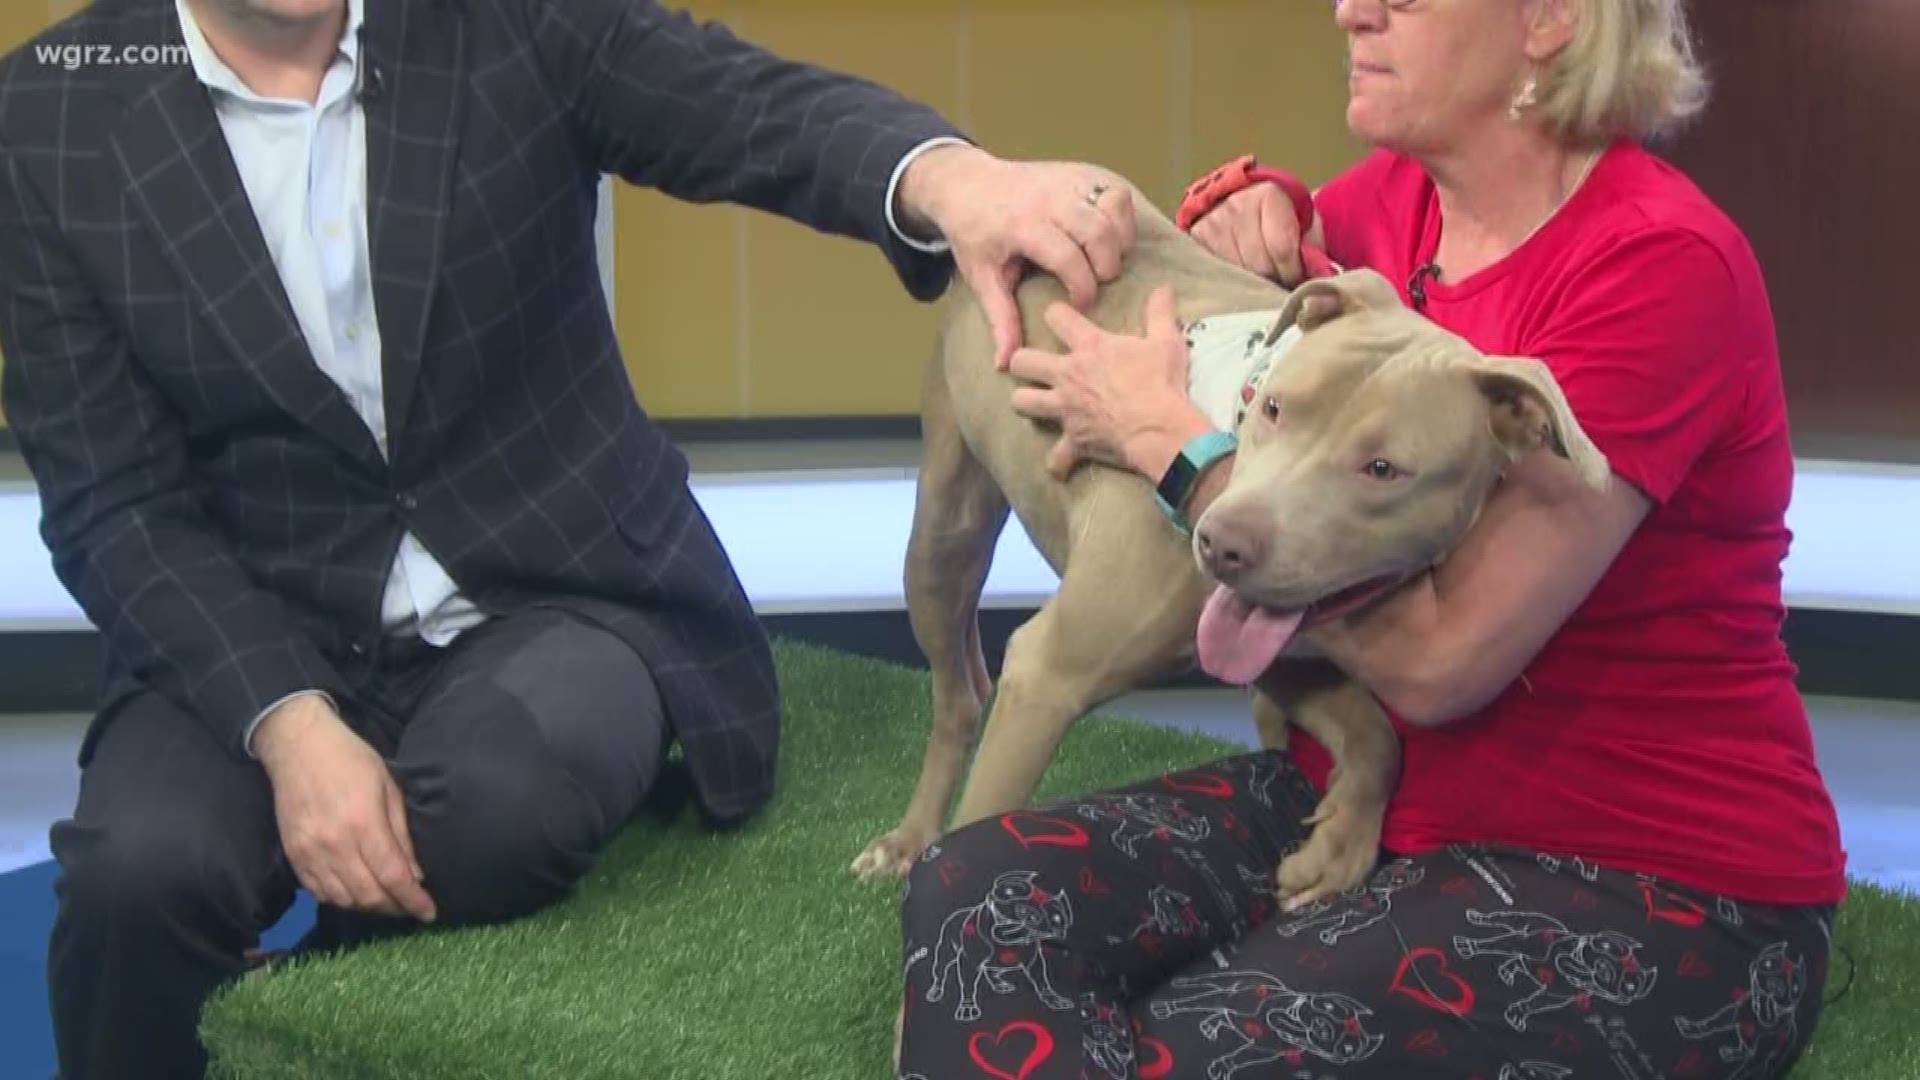 Oscar is an energetic pup from the Buffalo Animal Shelter who needs a loving home.